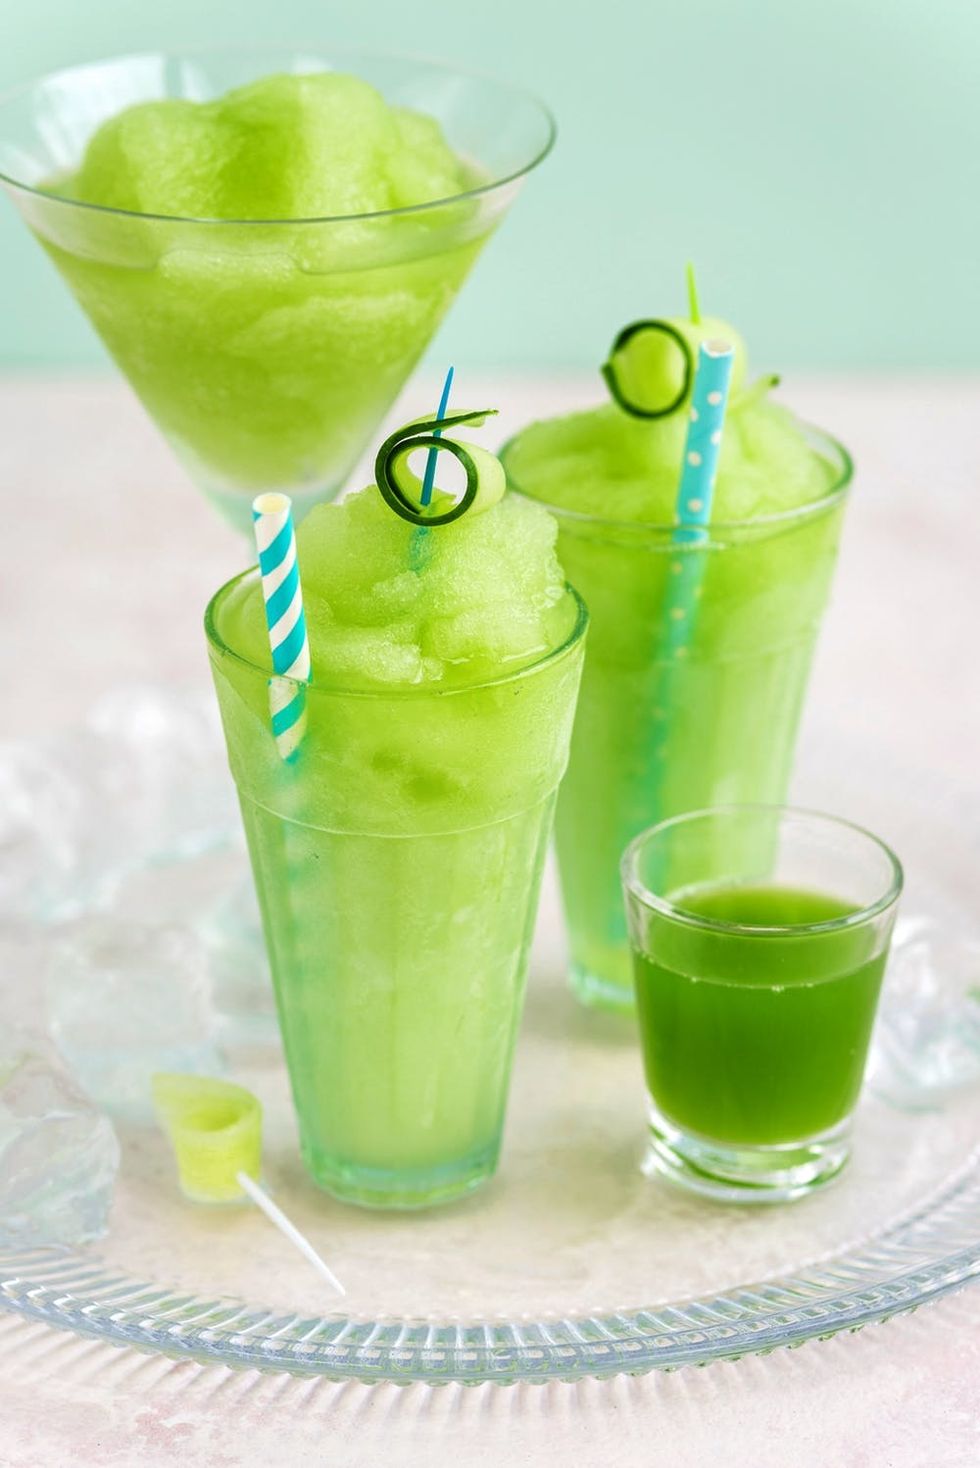 This cucumber gin slushie is the only drink you need this summer! Seriously refreshing and strictly for adults only.